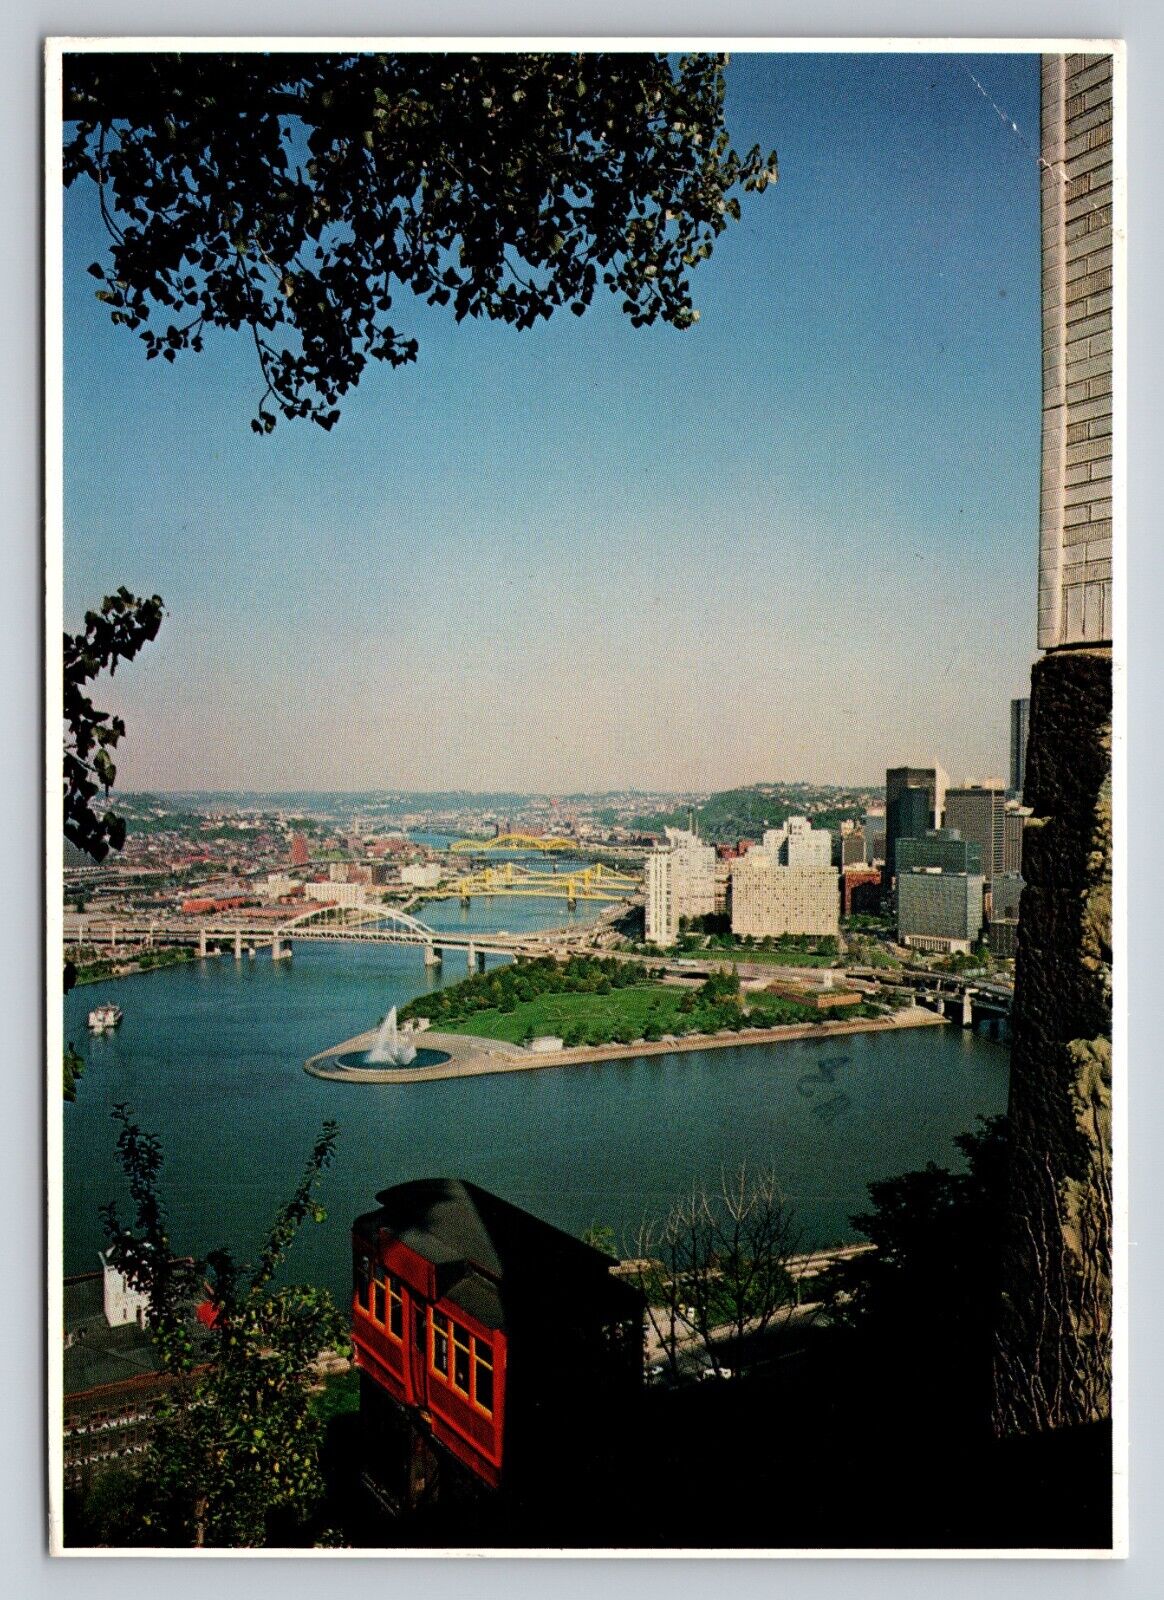 Duquesne Incline In Pittsburgh Pennsylvania Vintage Posted 1983 Postcard